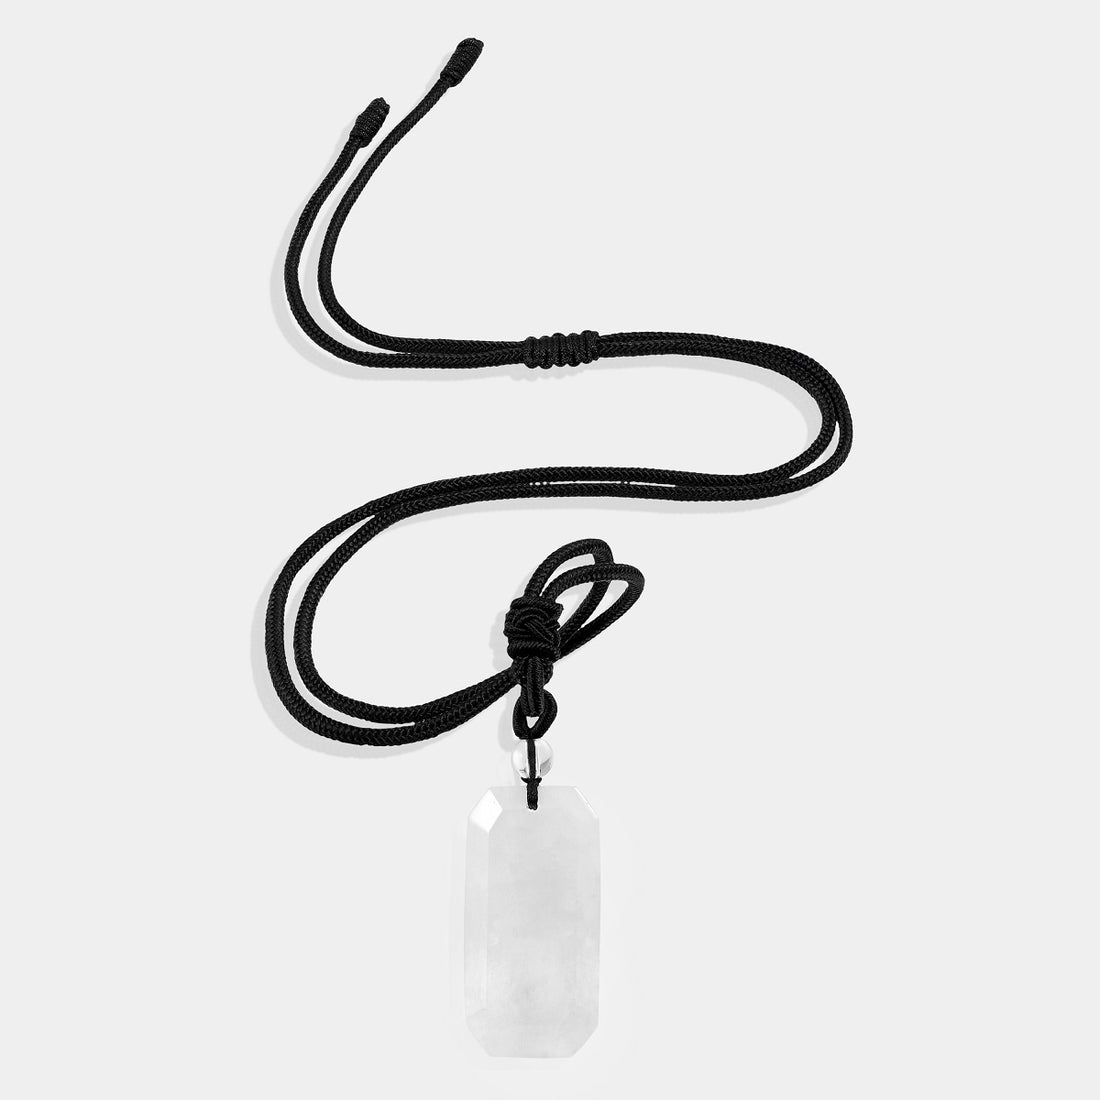 A close-up view of the pendant necklace showcasing the smooth baguette-shaped white quartz gemstone wrapped with an adjustable rope necklace, displaying its pure and ethereal white color.